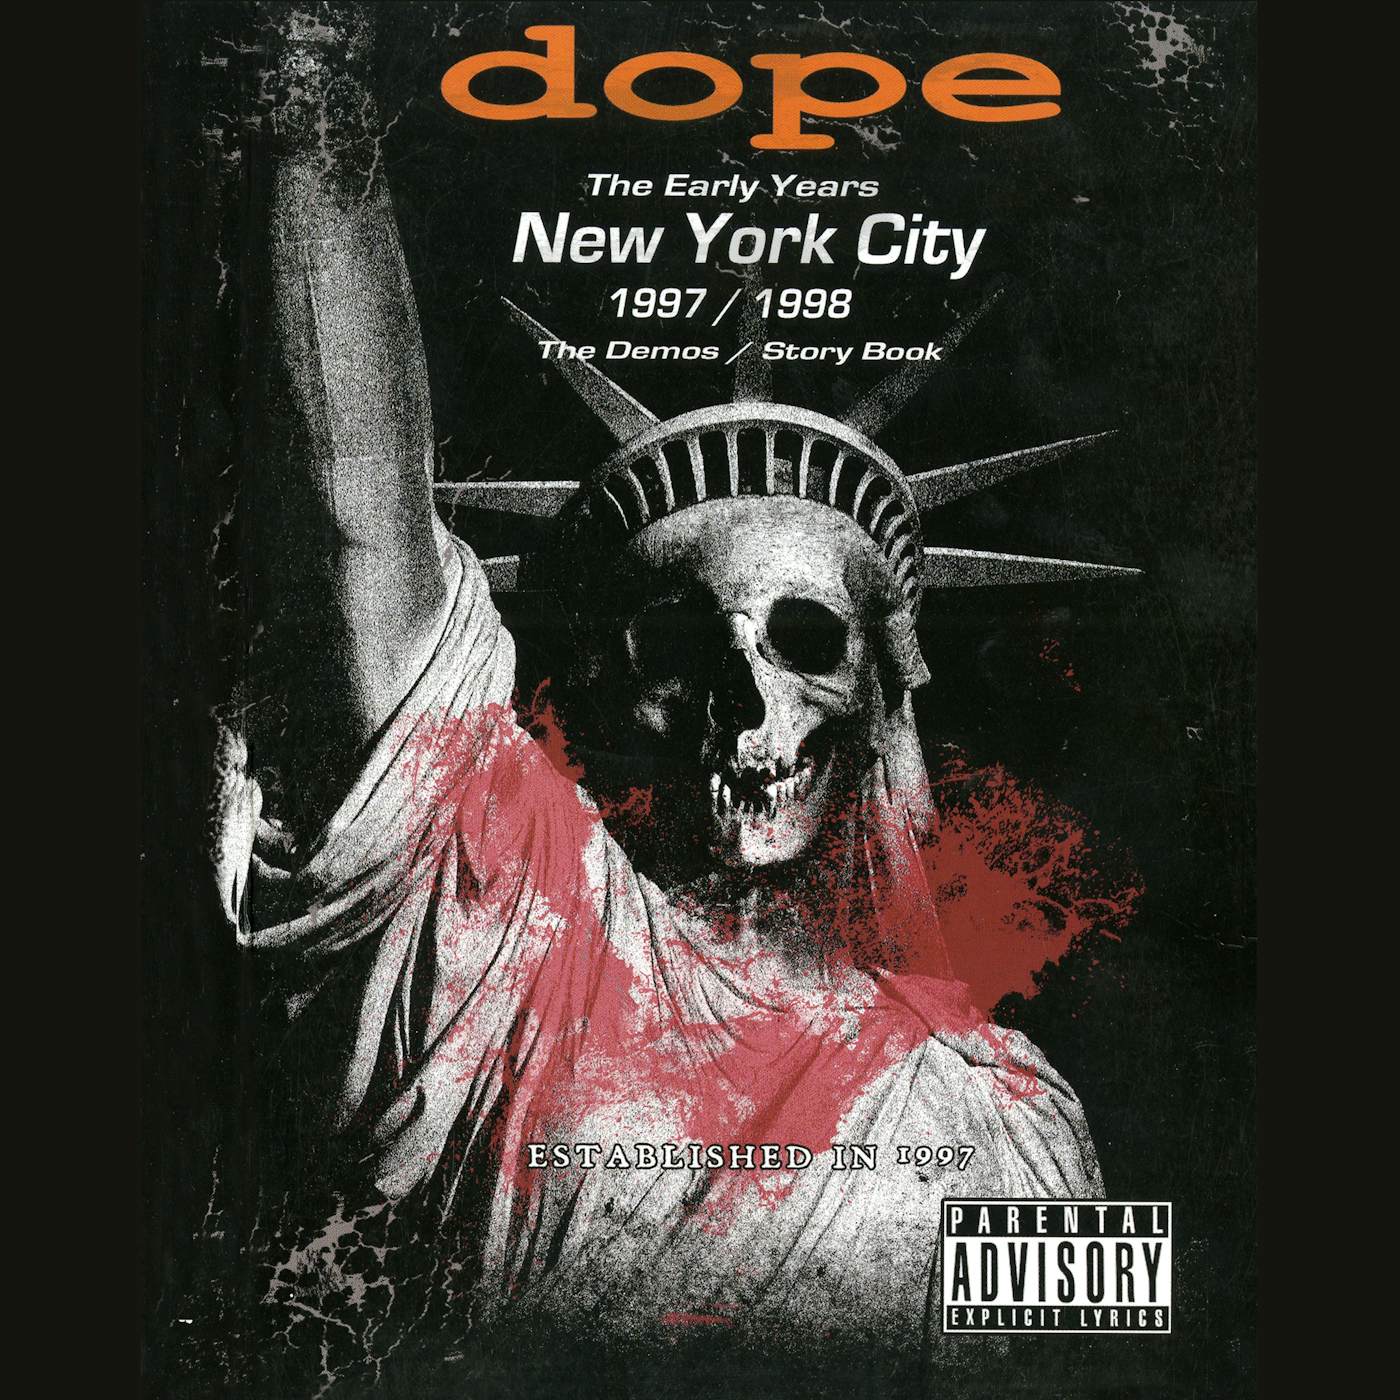 Dope THE EARLY YEARS NEW YORK CITY 1997/1998 CD